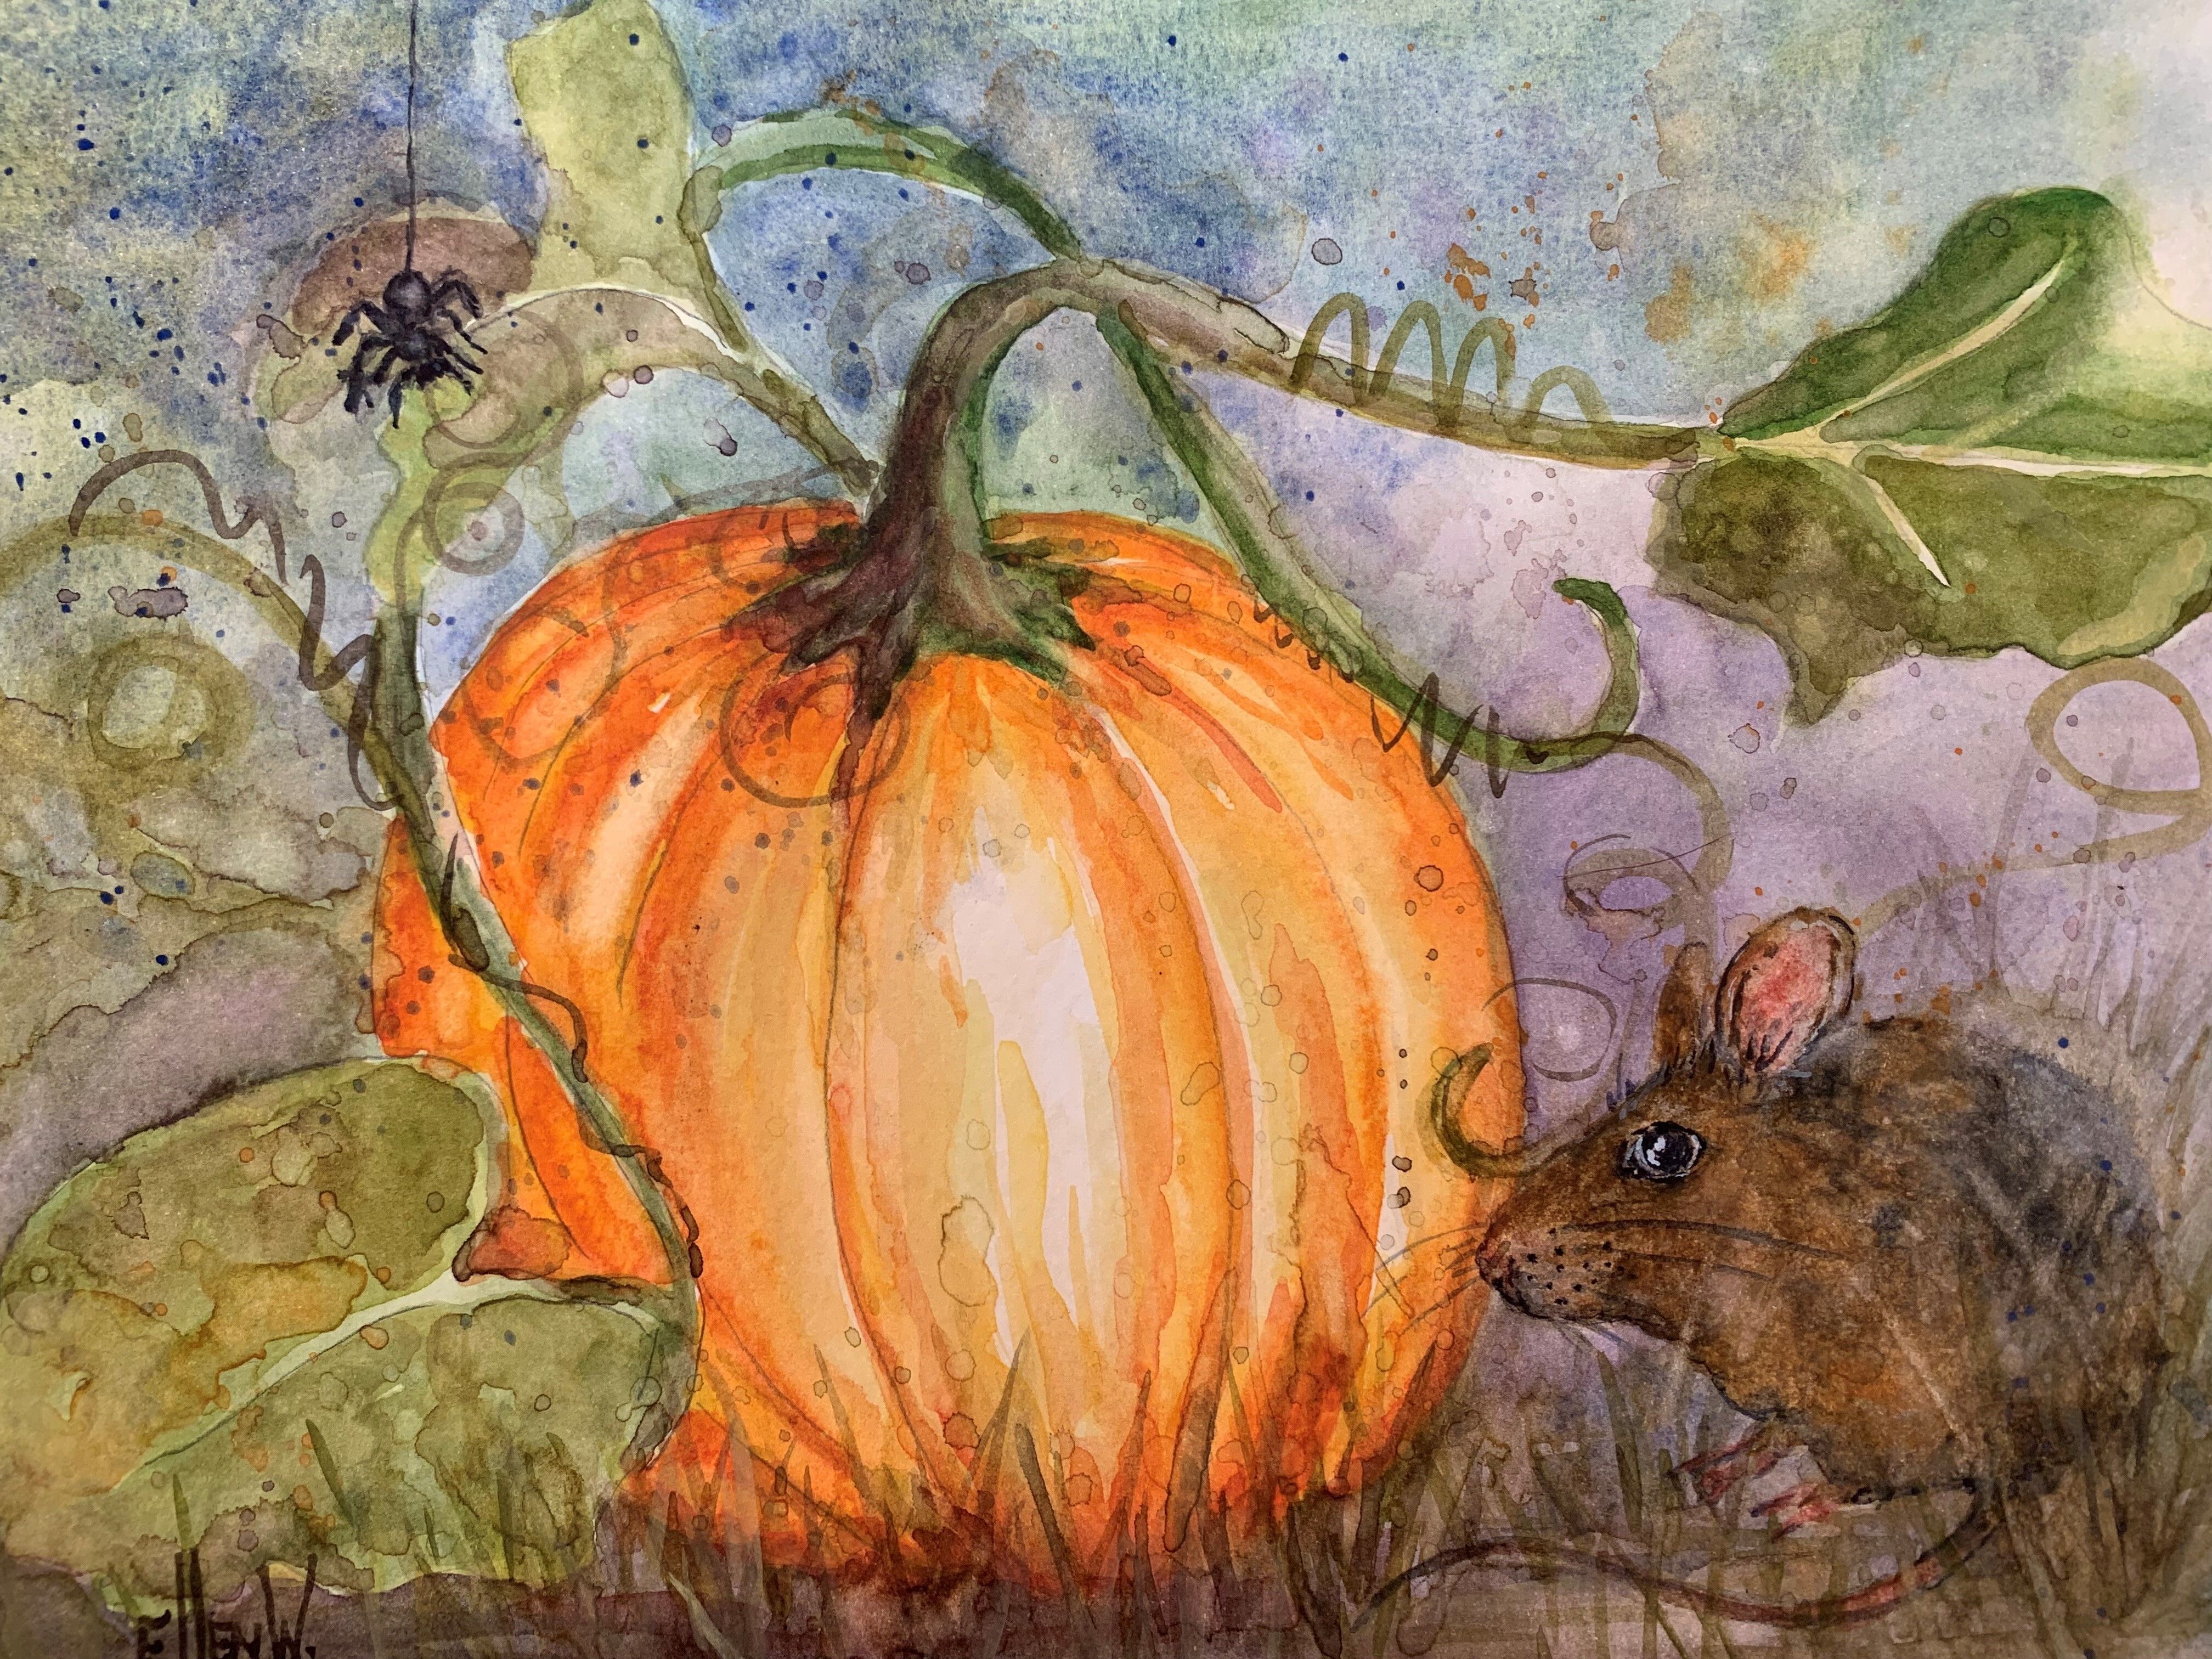 Orange pumpkin is nestled in pumpkin vine with mouse nearby and spider hanging from its web